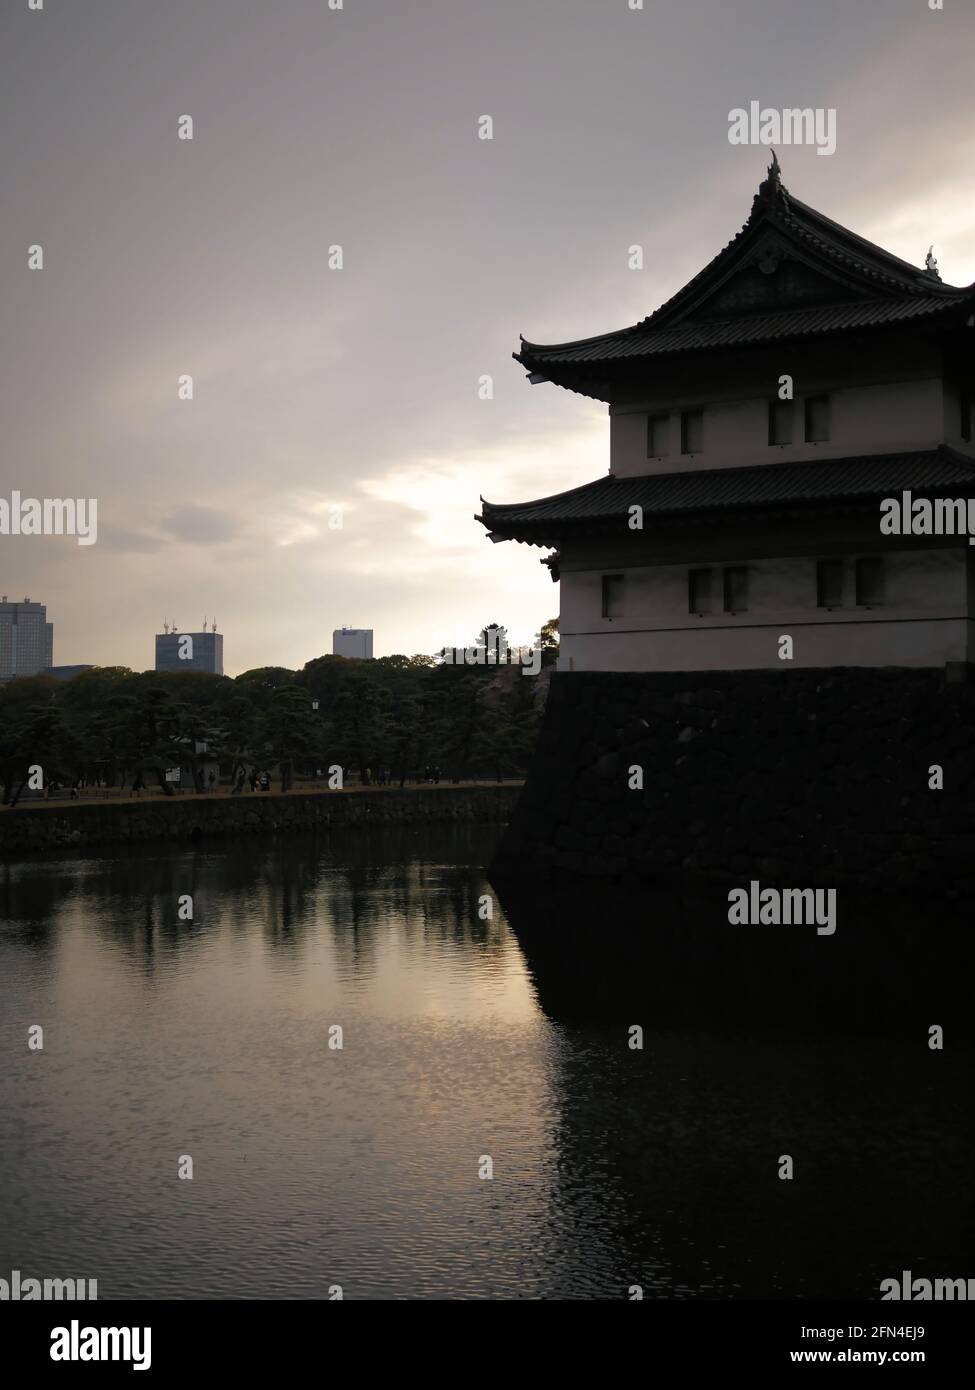 The famous Tokyo Imperial Palace at sunset. Main official residence of the Emperor of Japan. Moat surrounding the Fushimi-yagura watchtower. Stock Photo